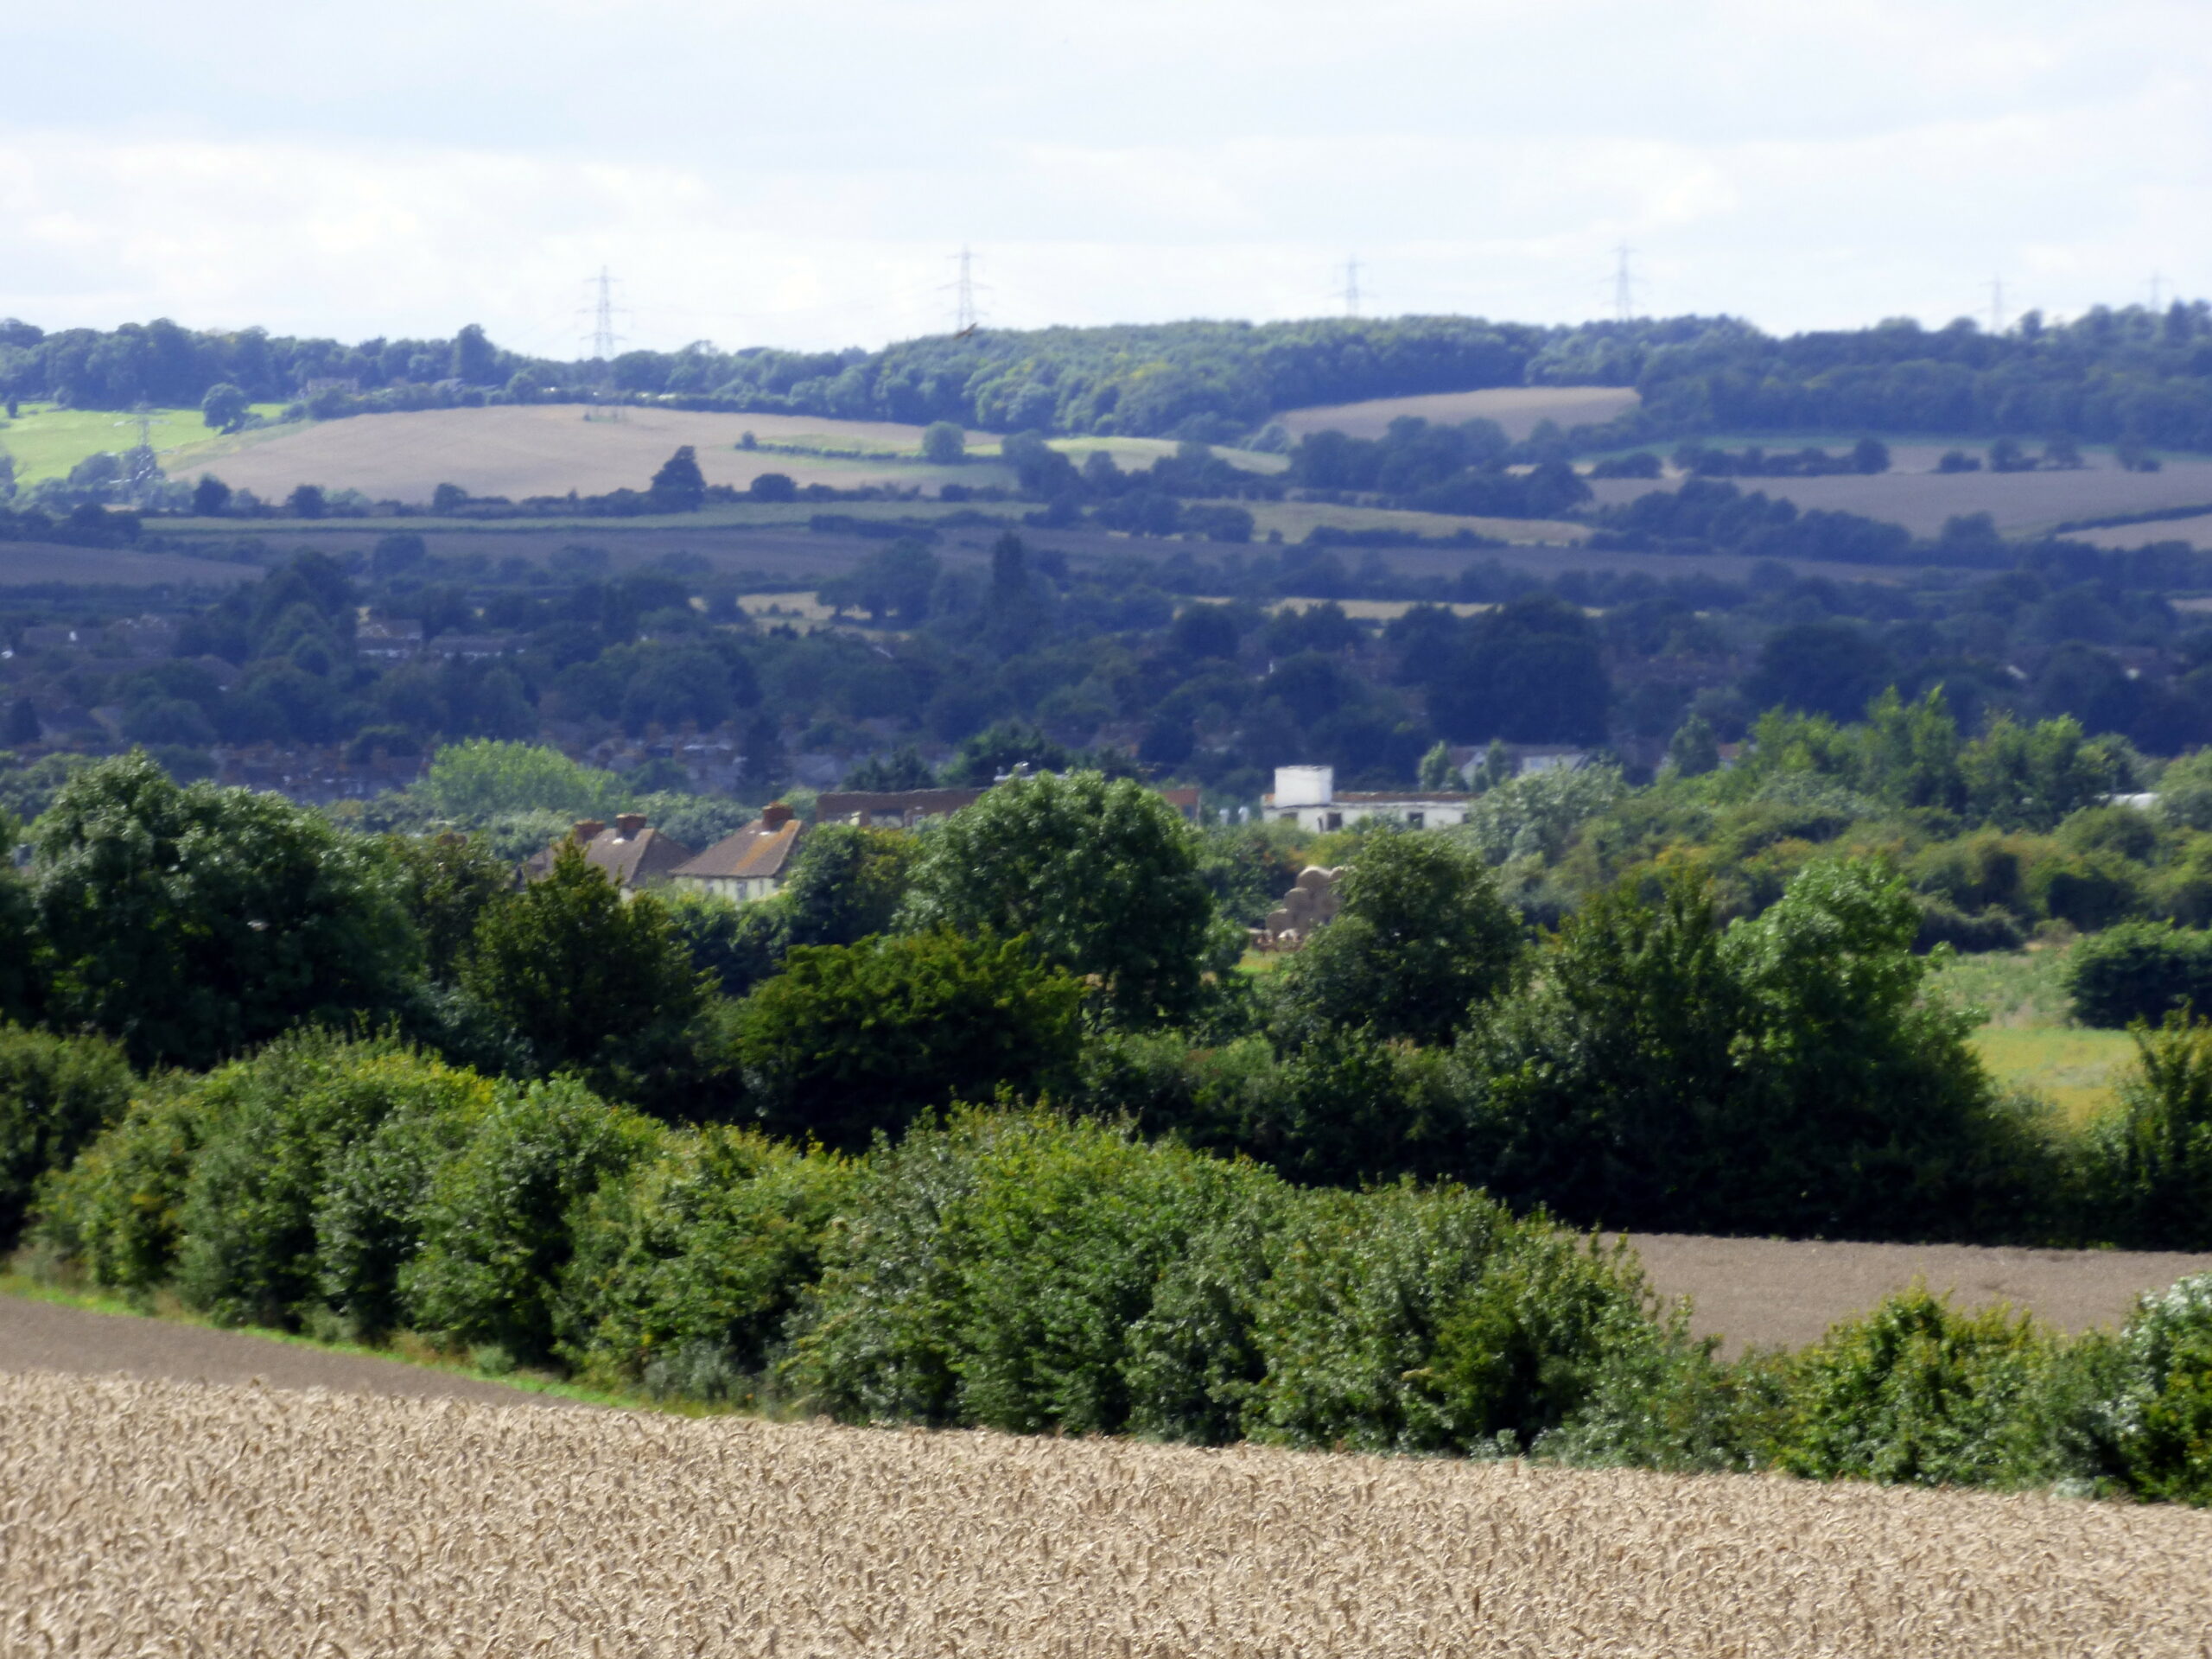 Local countryside landscape in Letchworth on a bright day.